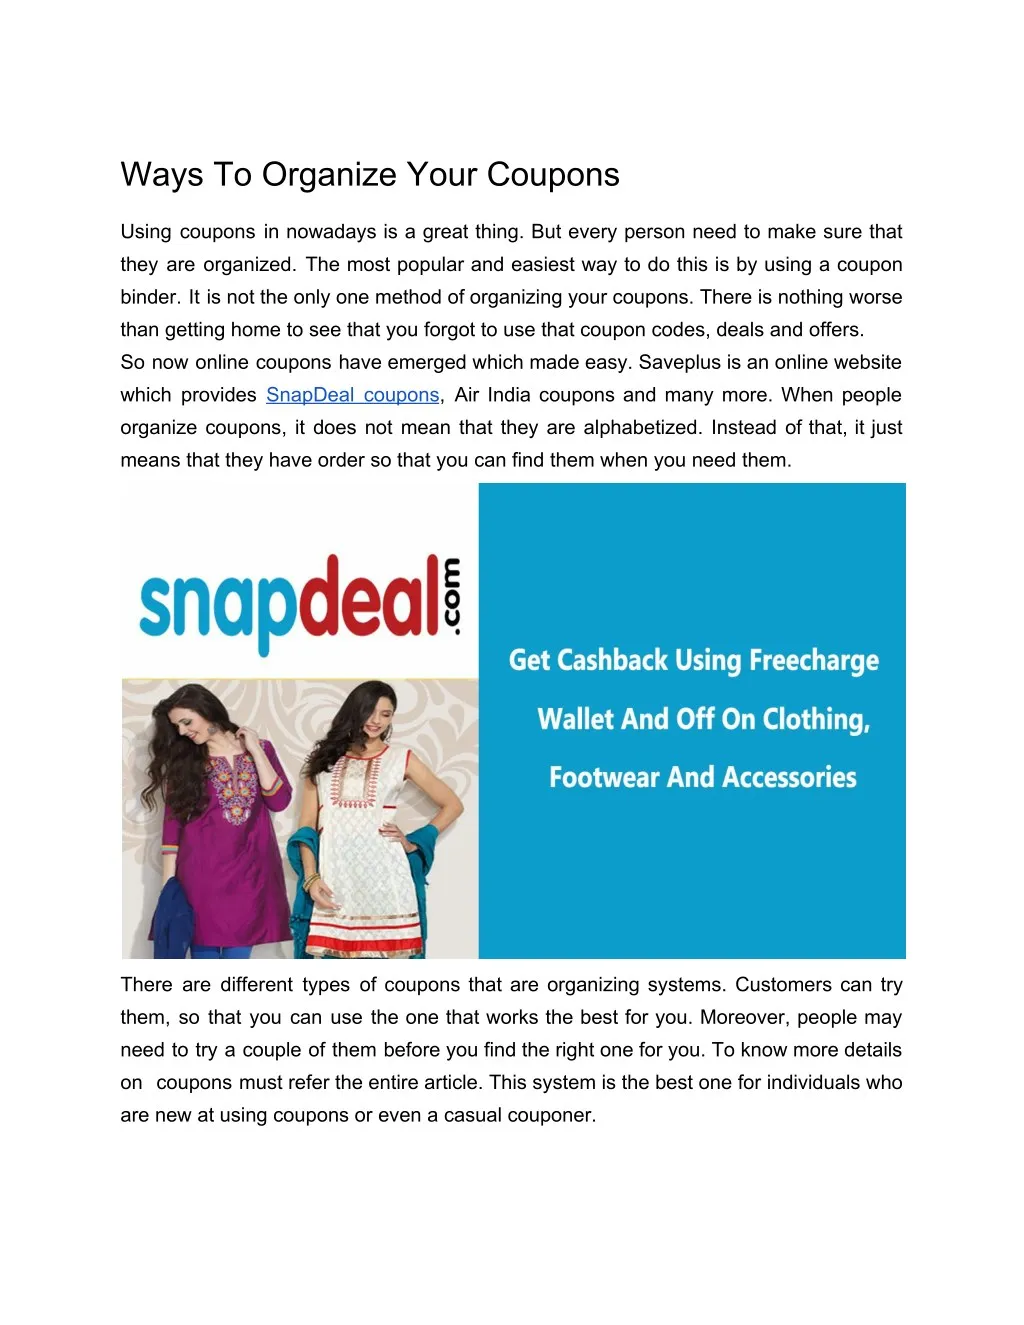 ways to organize your coupons